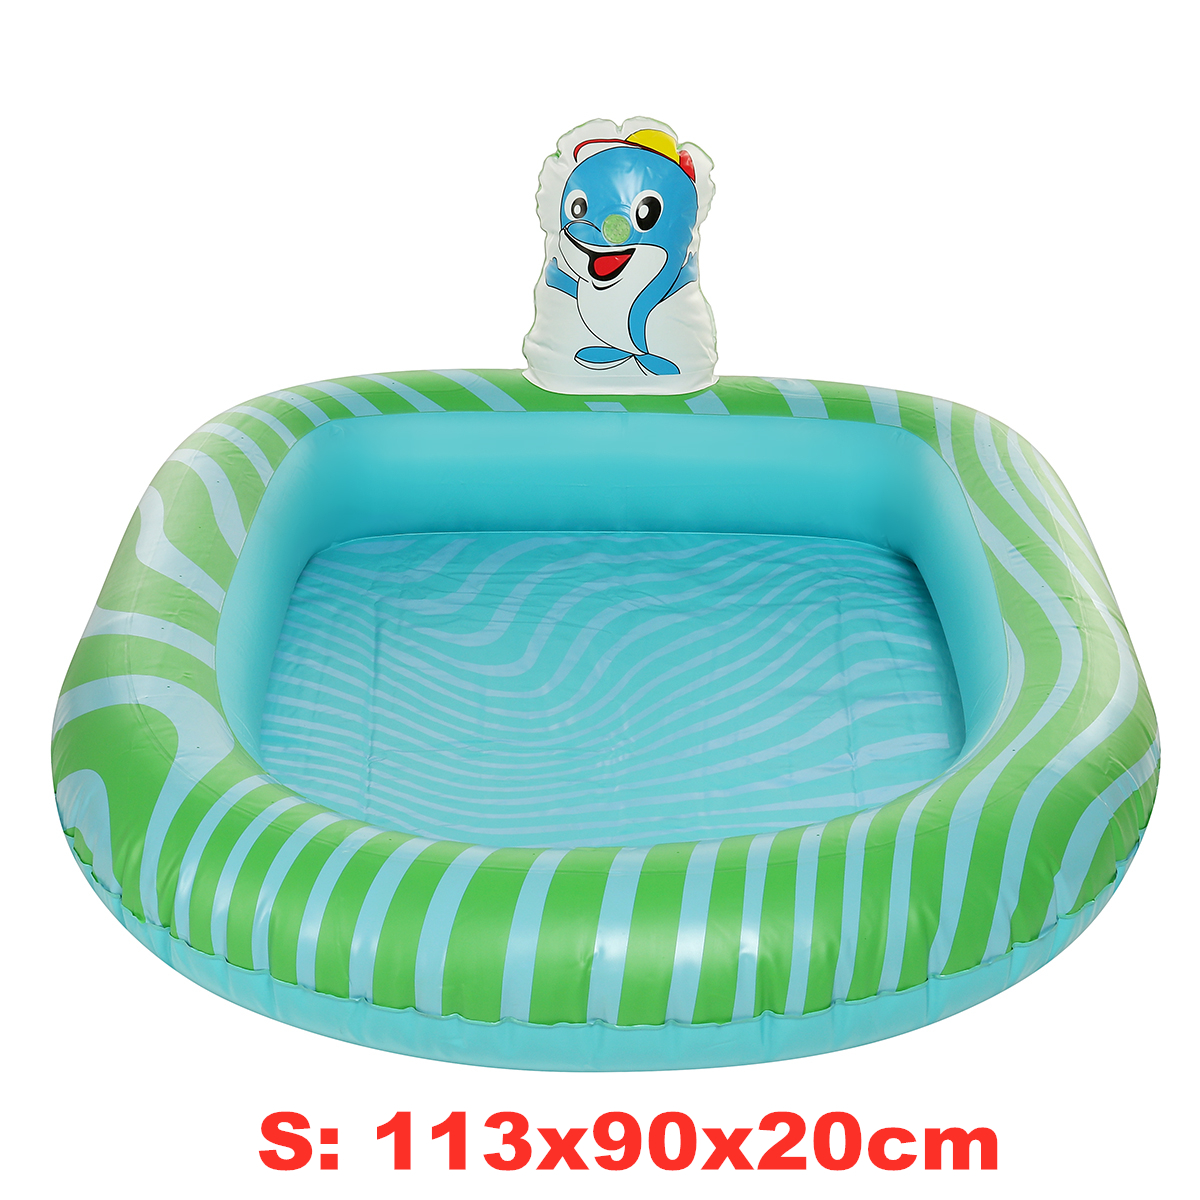 PVC-Children-Inflatable-Swimming-Pool-Sprinkler-Pool-Thickened-Cartoon-Pattern-Outdoor-Swimming-Wate-1851764-8